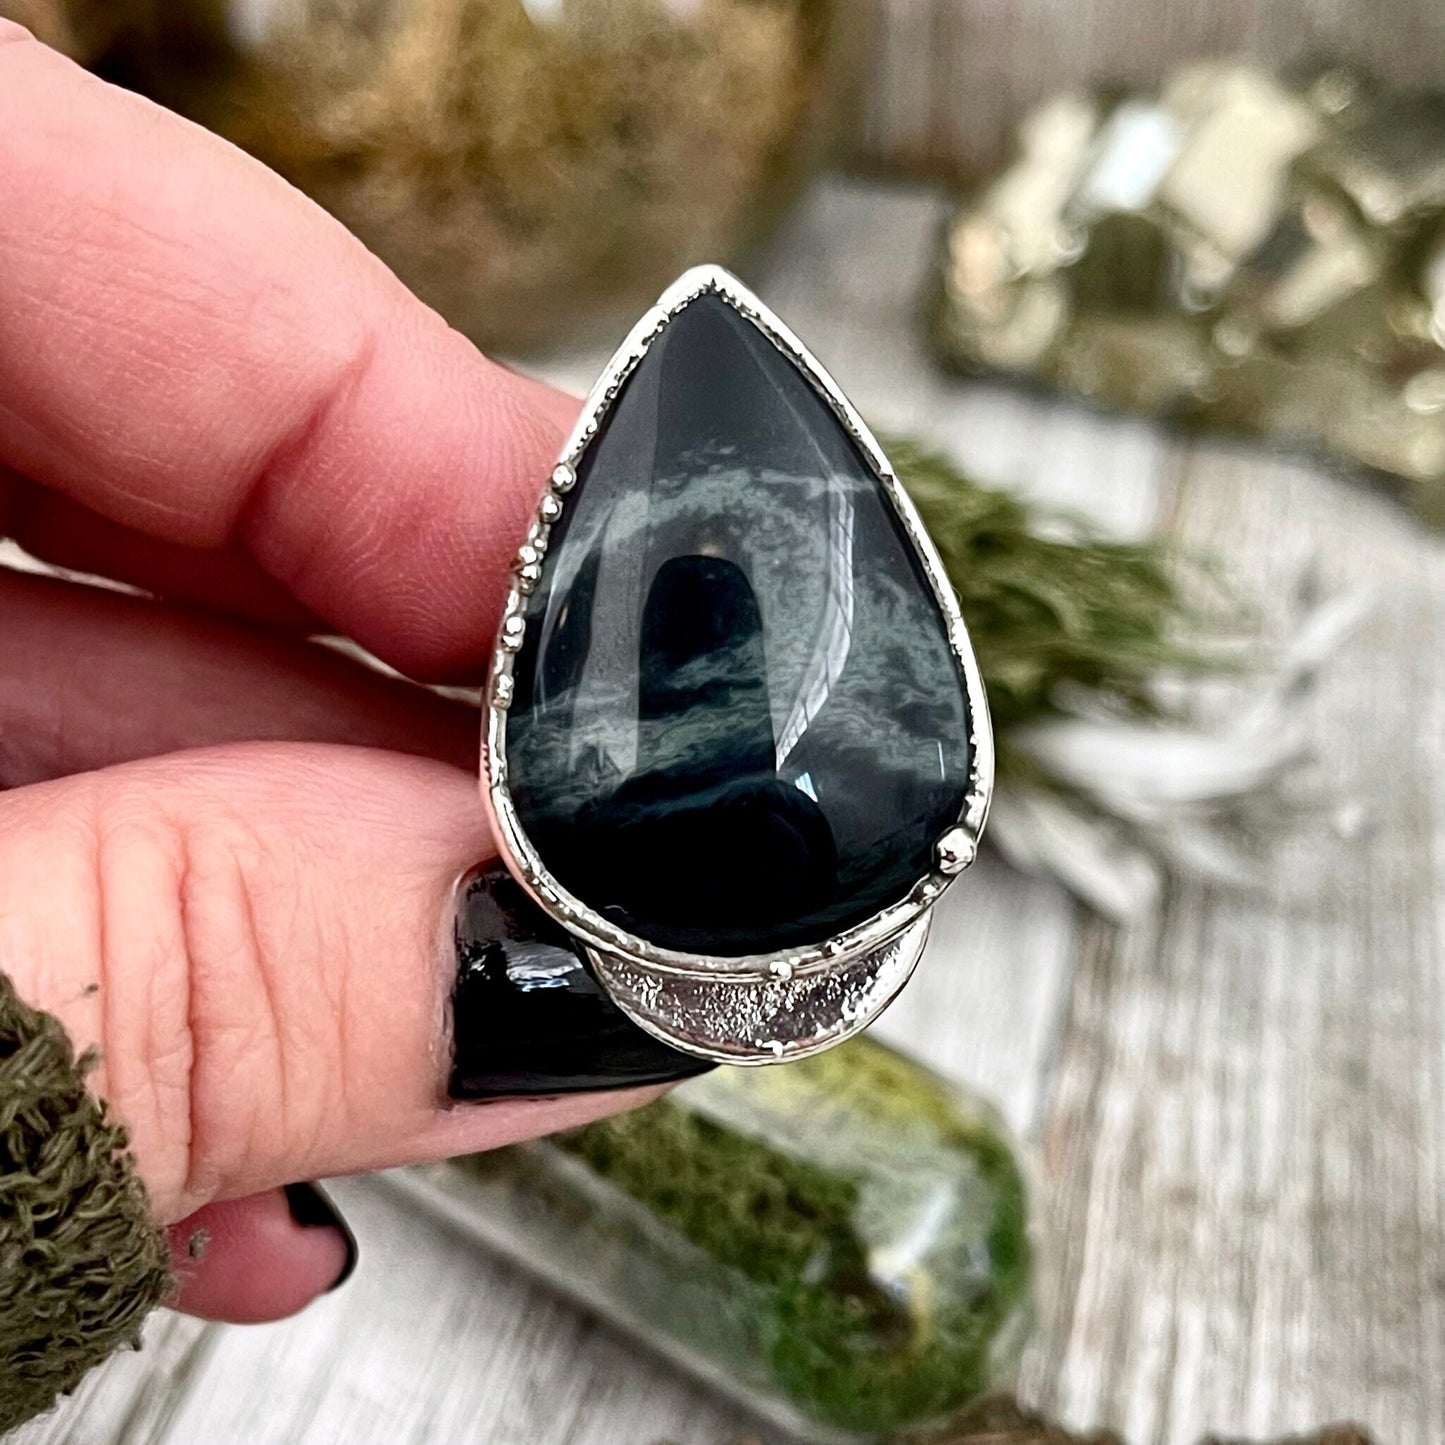 Size 8 Silver Spiderweb Obsidian Ring Large Crystal Ring / Foxlark Collection - One of a Kind / Big Crystal Ring Witchy Jewelry